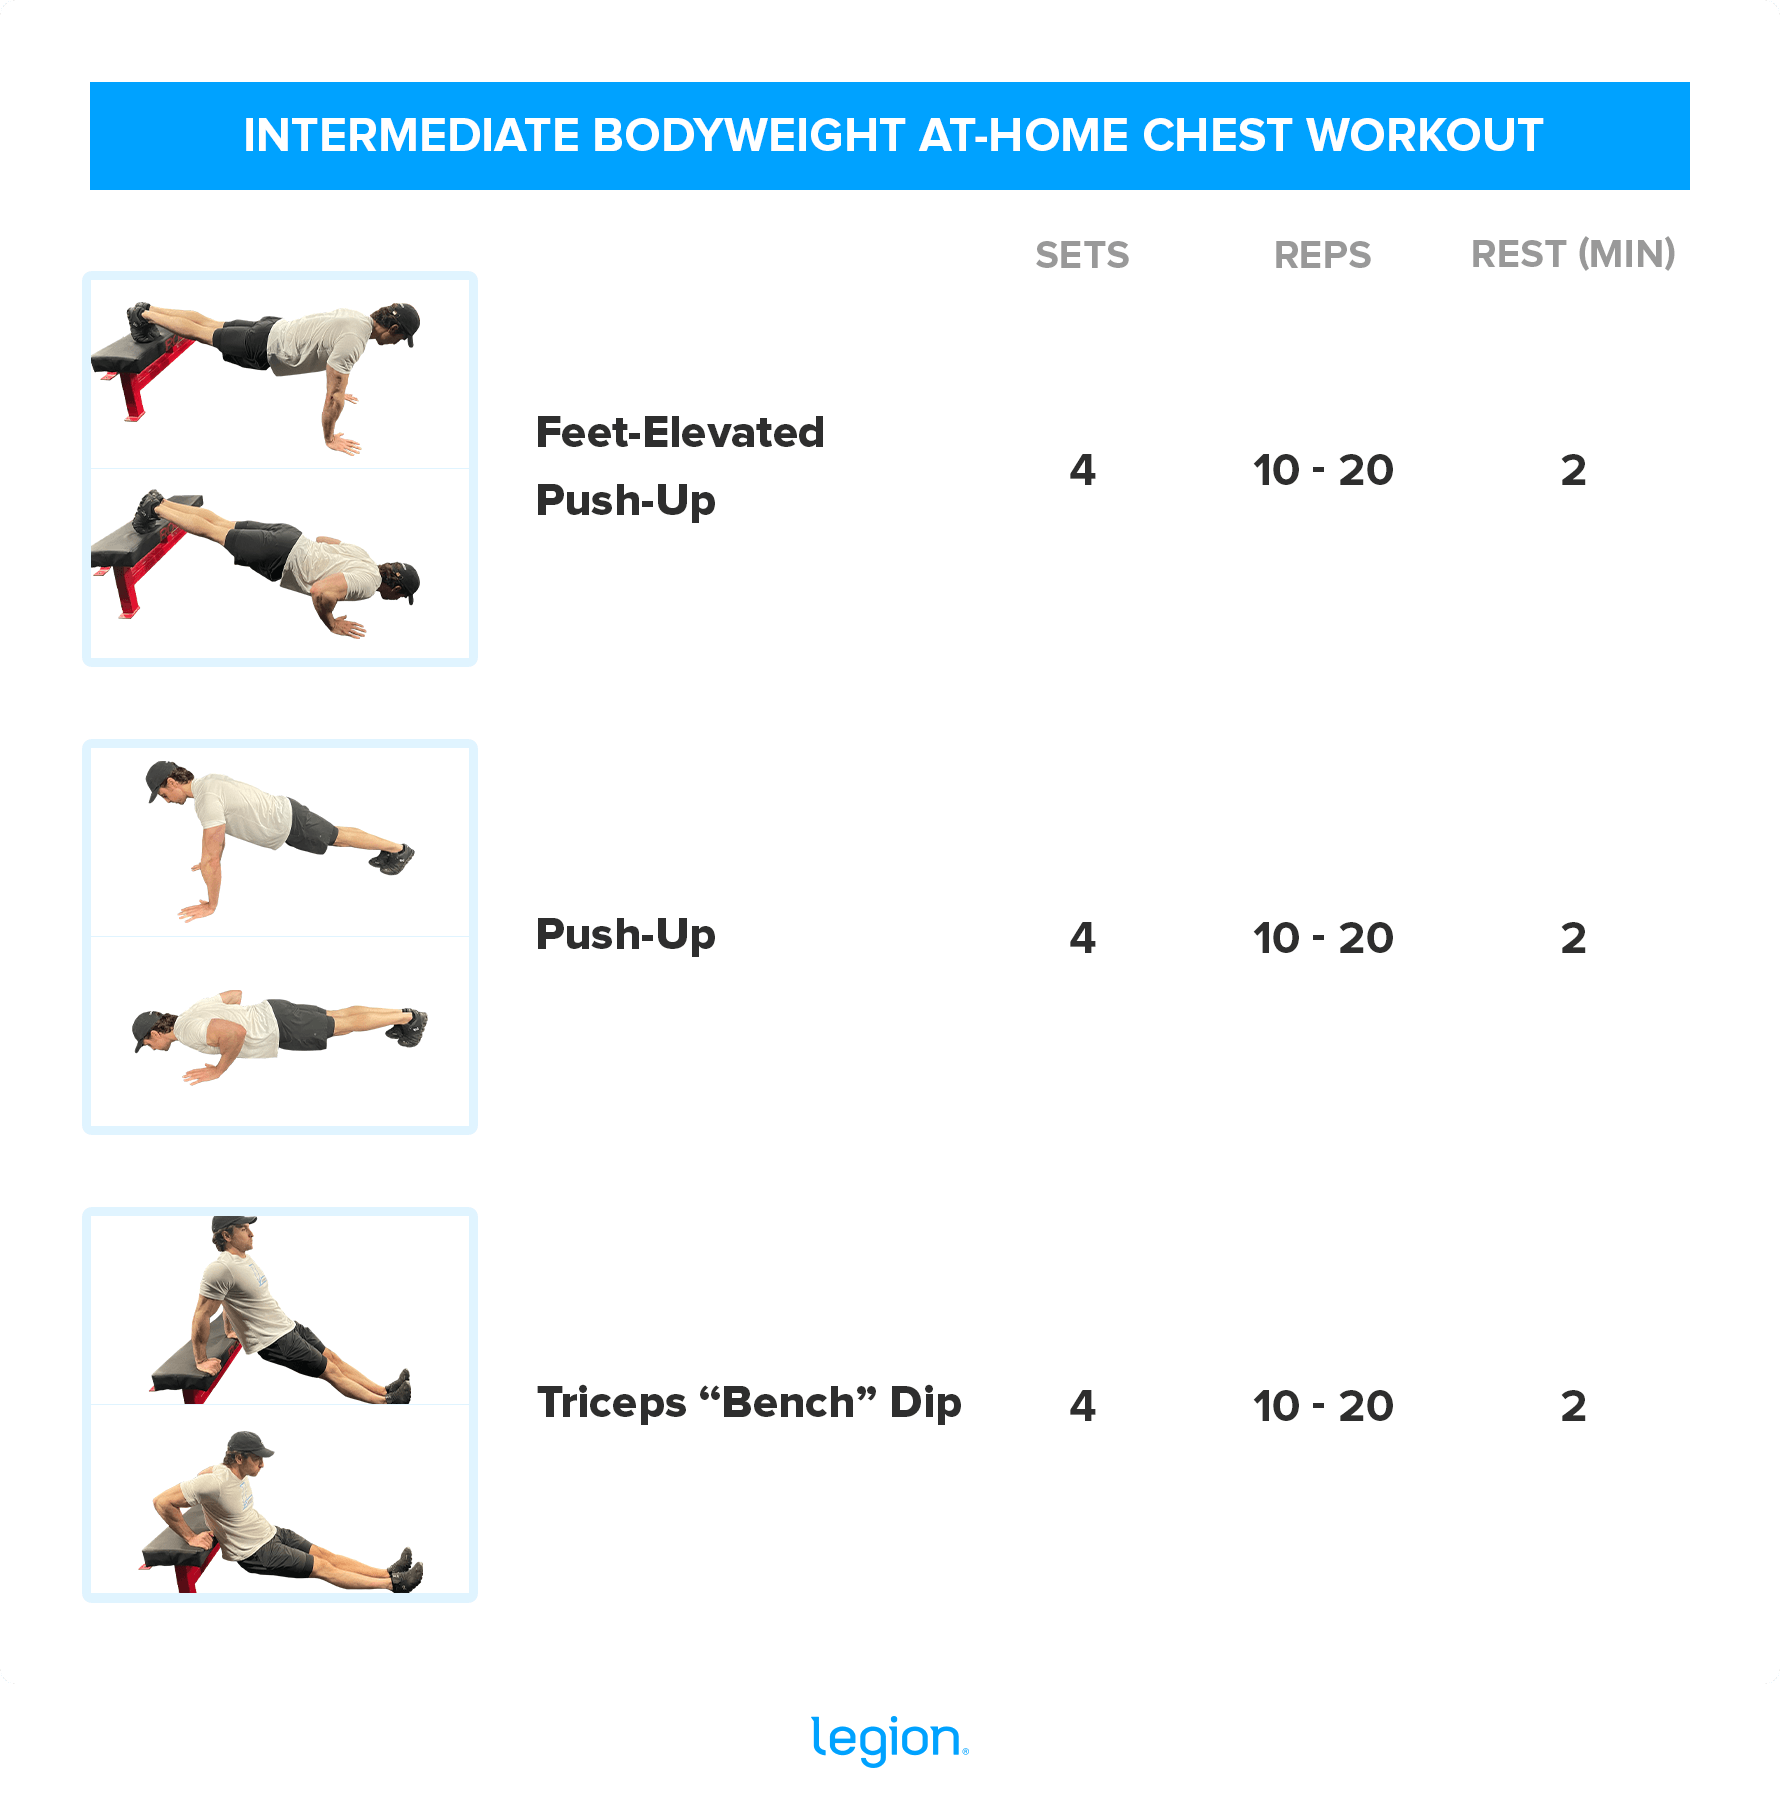 INTERMEDIATE BODYWEIGHT AT-HOME CHEST WORKOUT